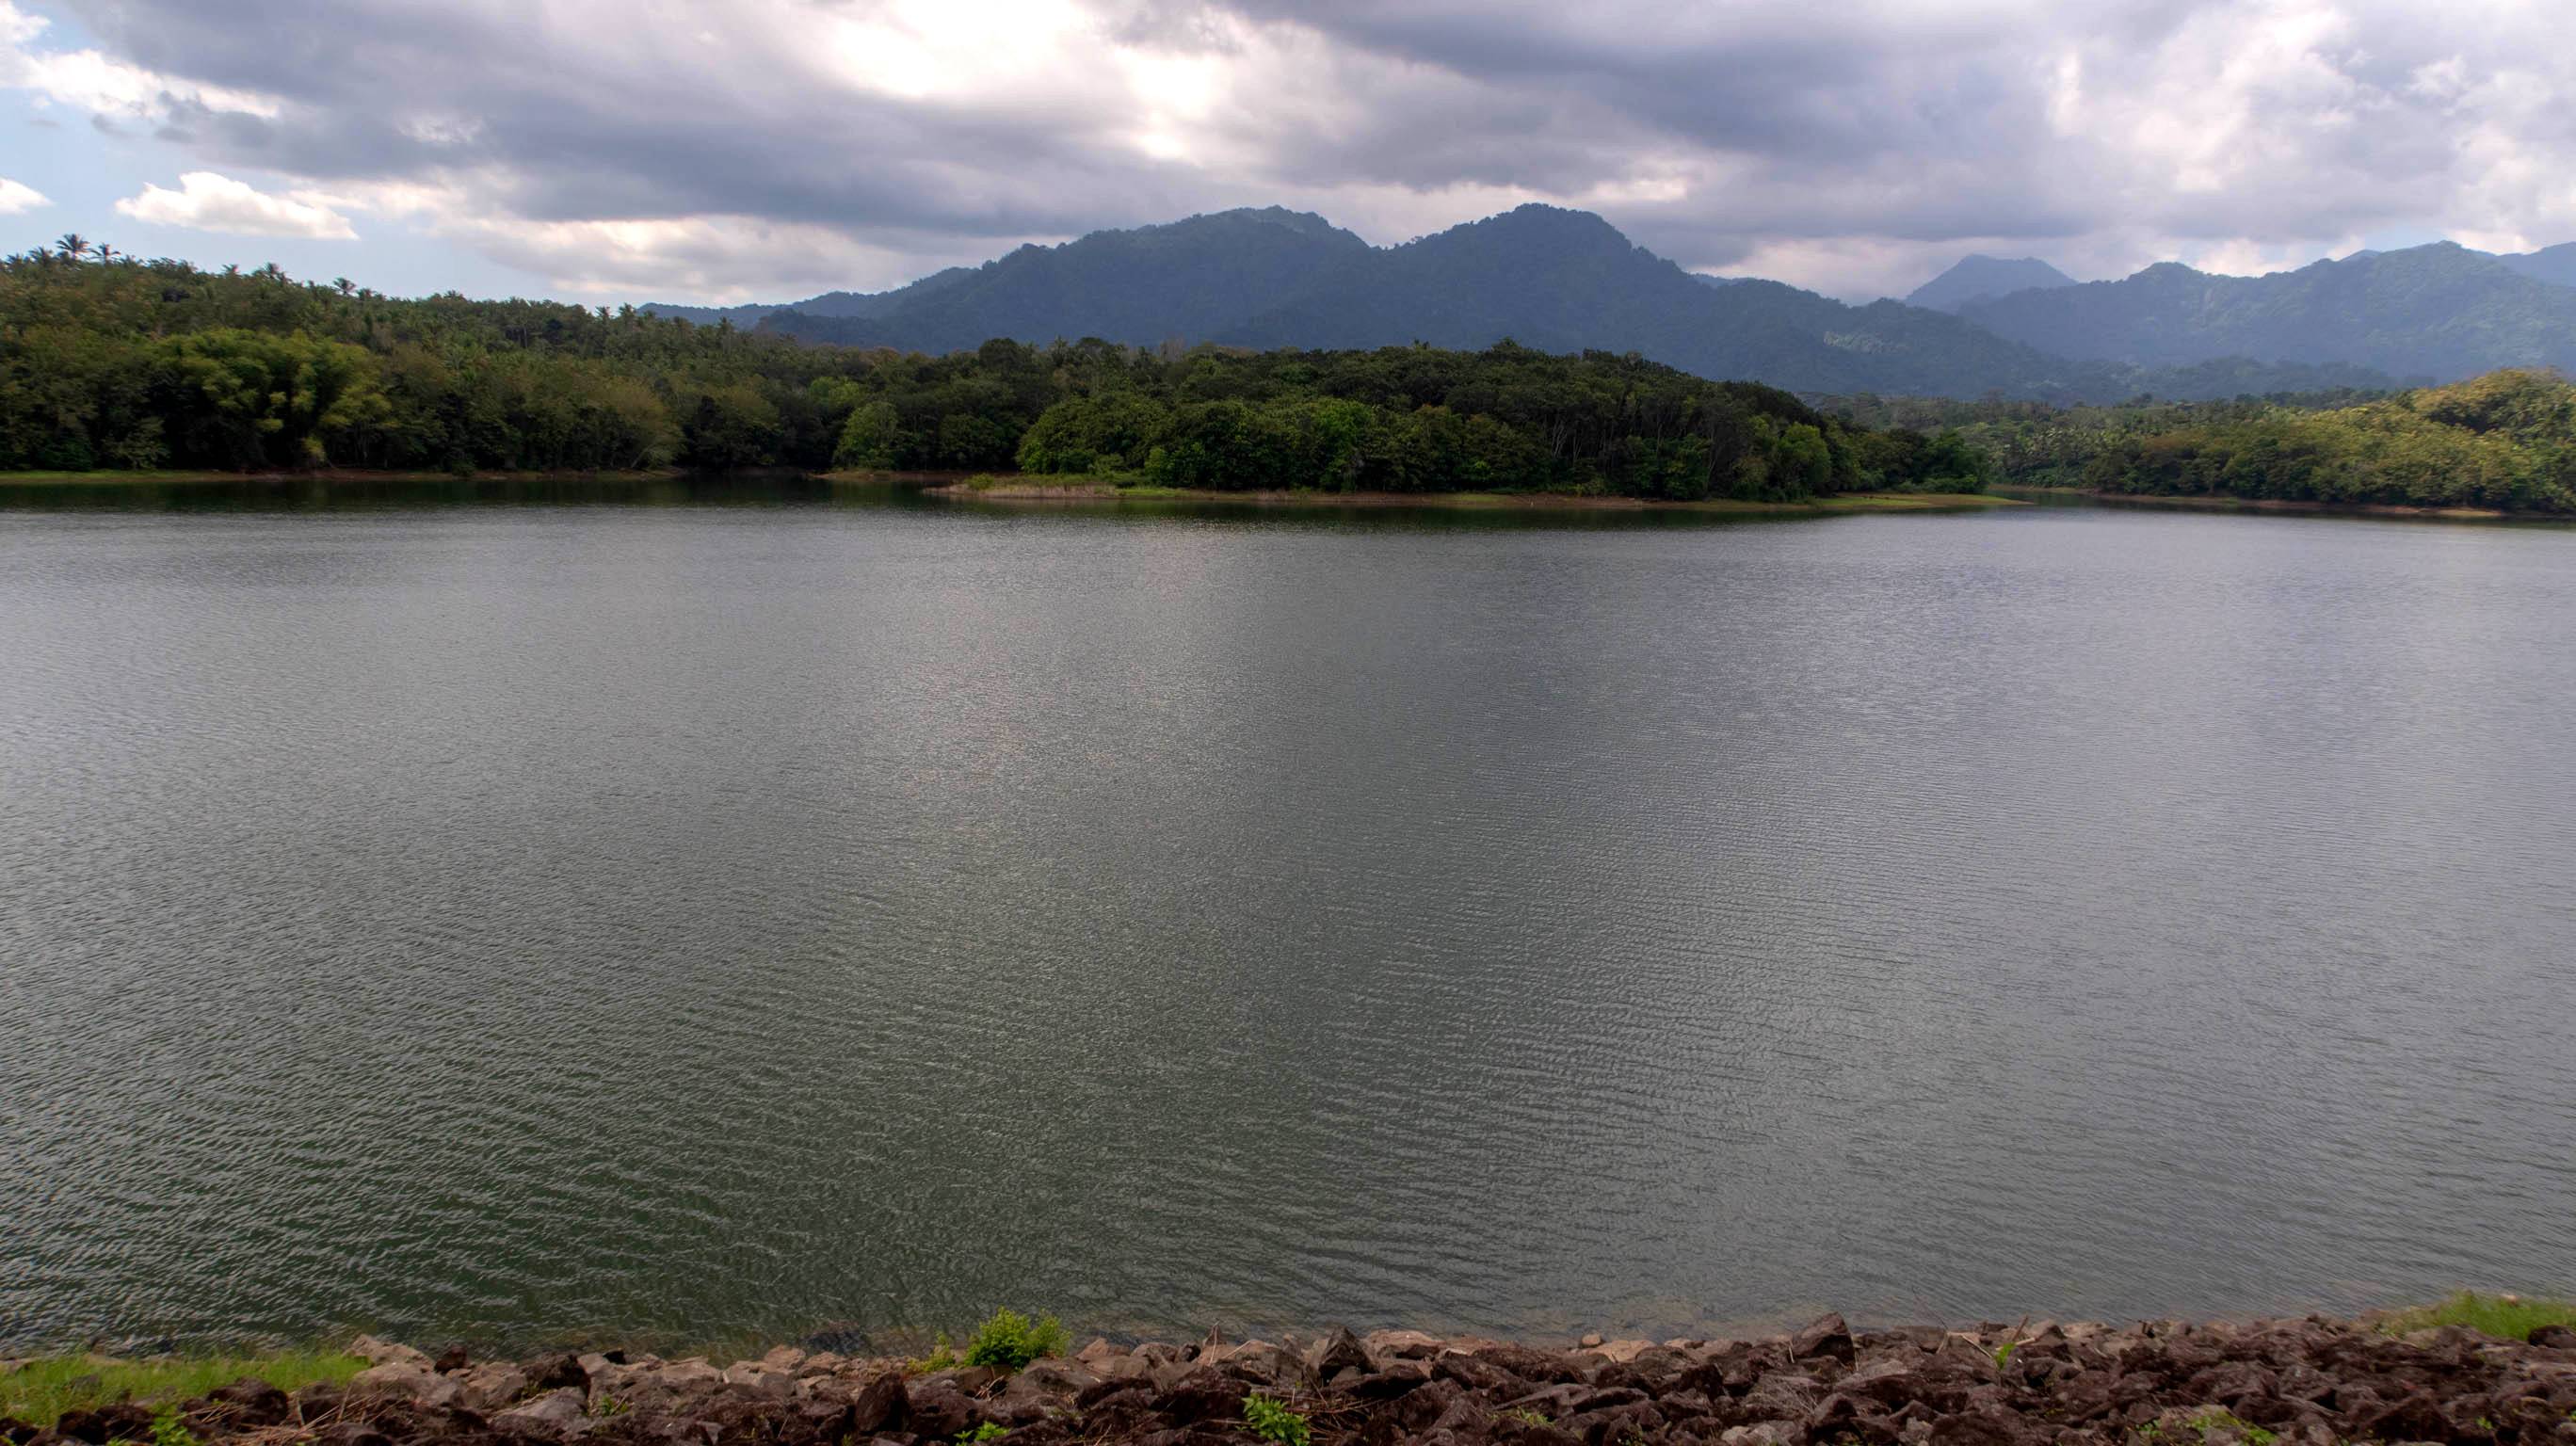 The view of the Palasari Dam with forest and hills beyond